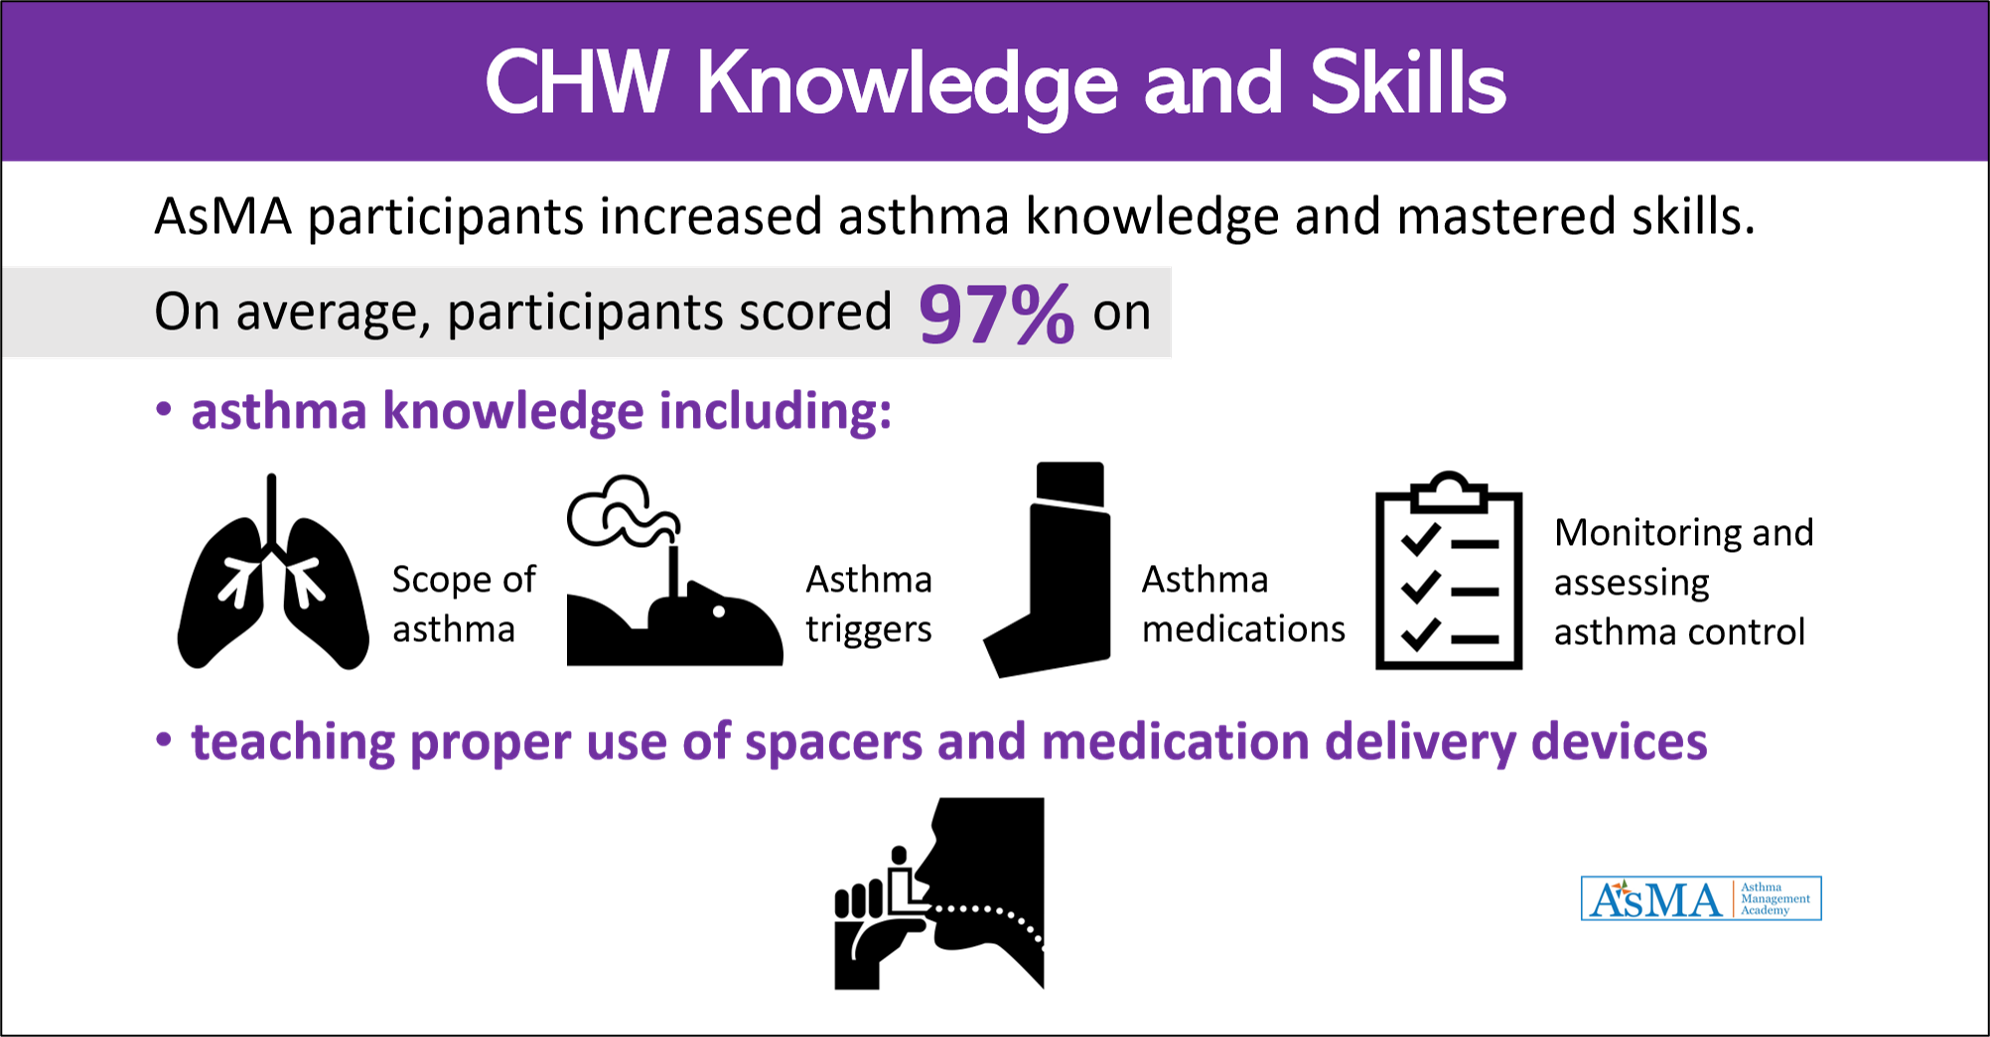 CHW Knowledge and Skills Impact: AsMA participants had an average score of 97% on asthma knowledge and medication devices